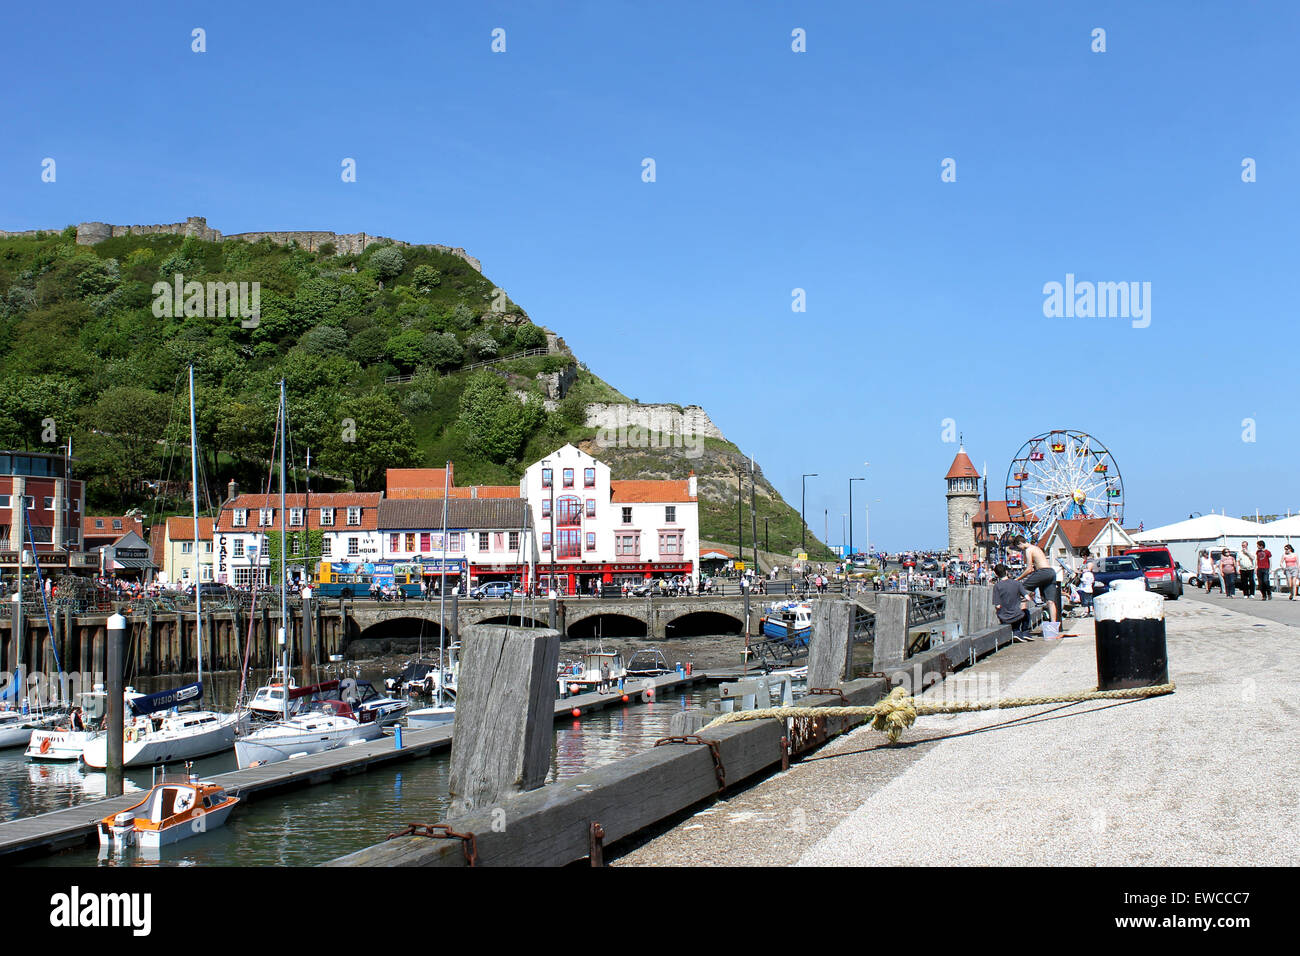 SCARBOROUGH, NORTH YORKSHIRE, ENGLAND - 19th May 2014: Scarborough town and harbor seaside resort on the 19th of May 2014. This Stock Photo